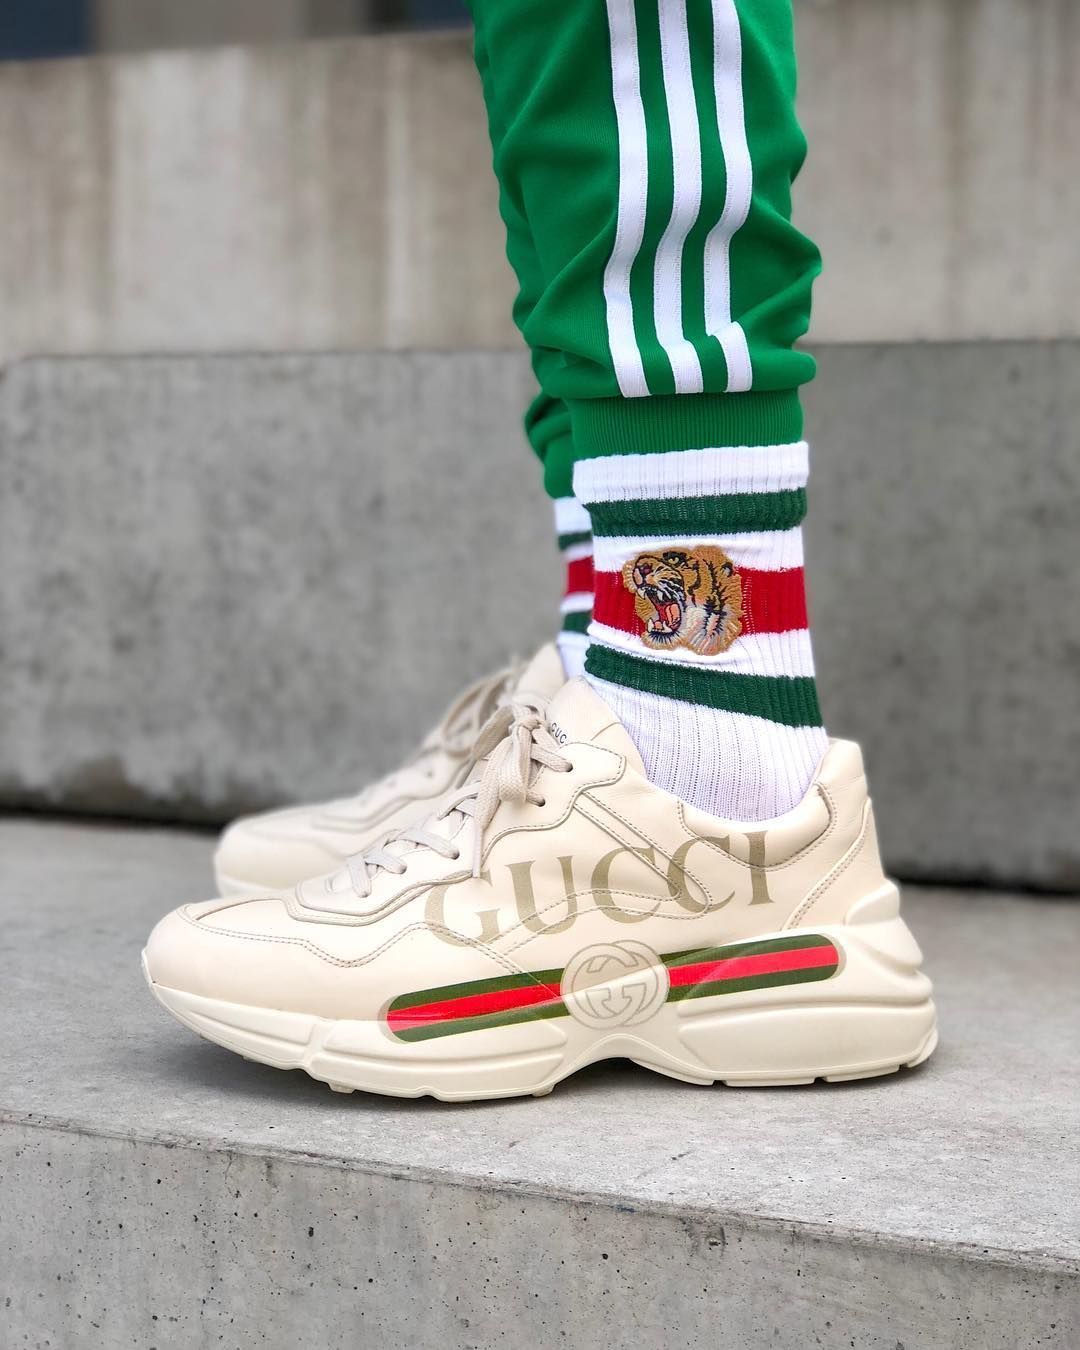 tendances chaussures homme hiver 2019, baskets gucci, grosses chaussures